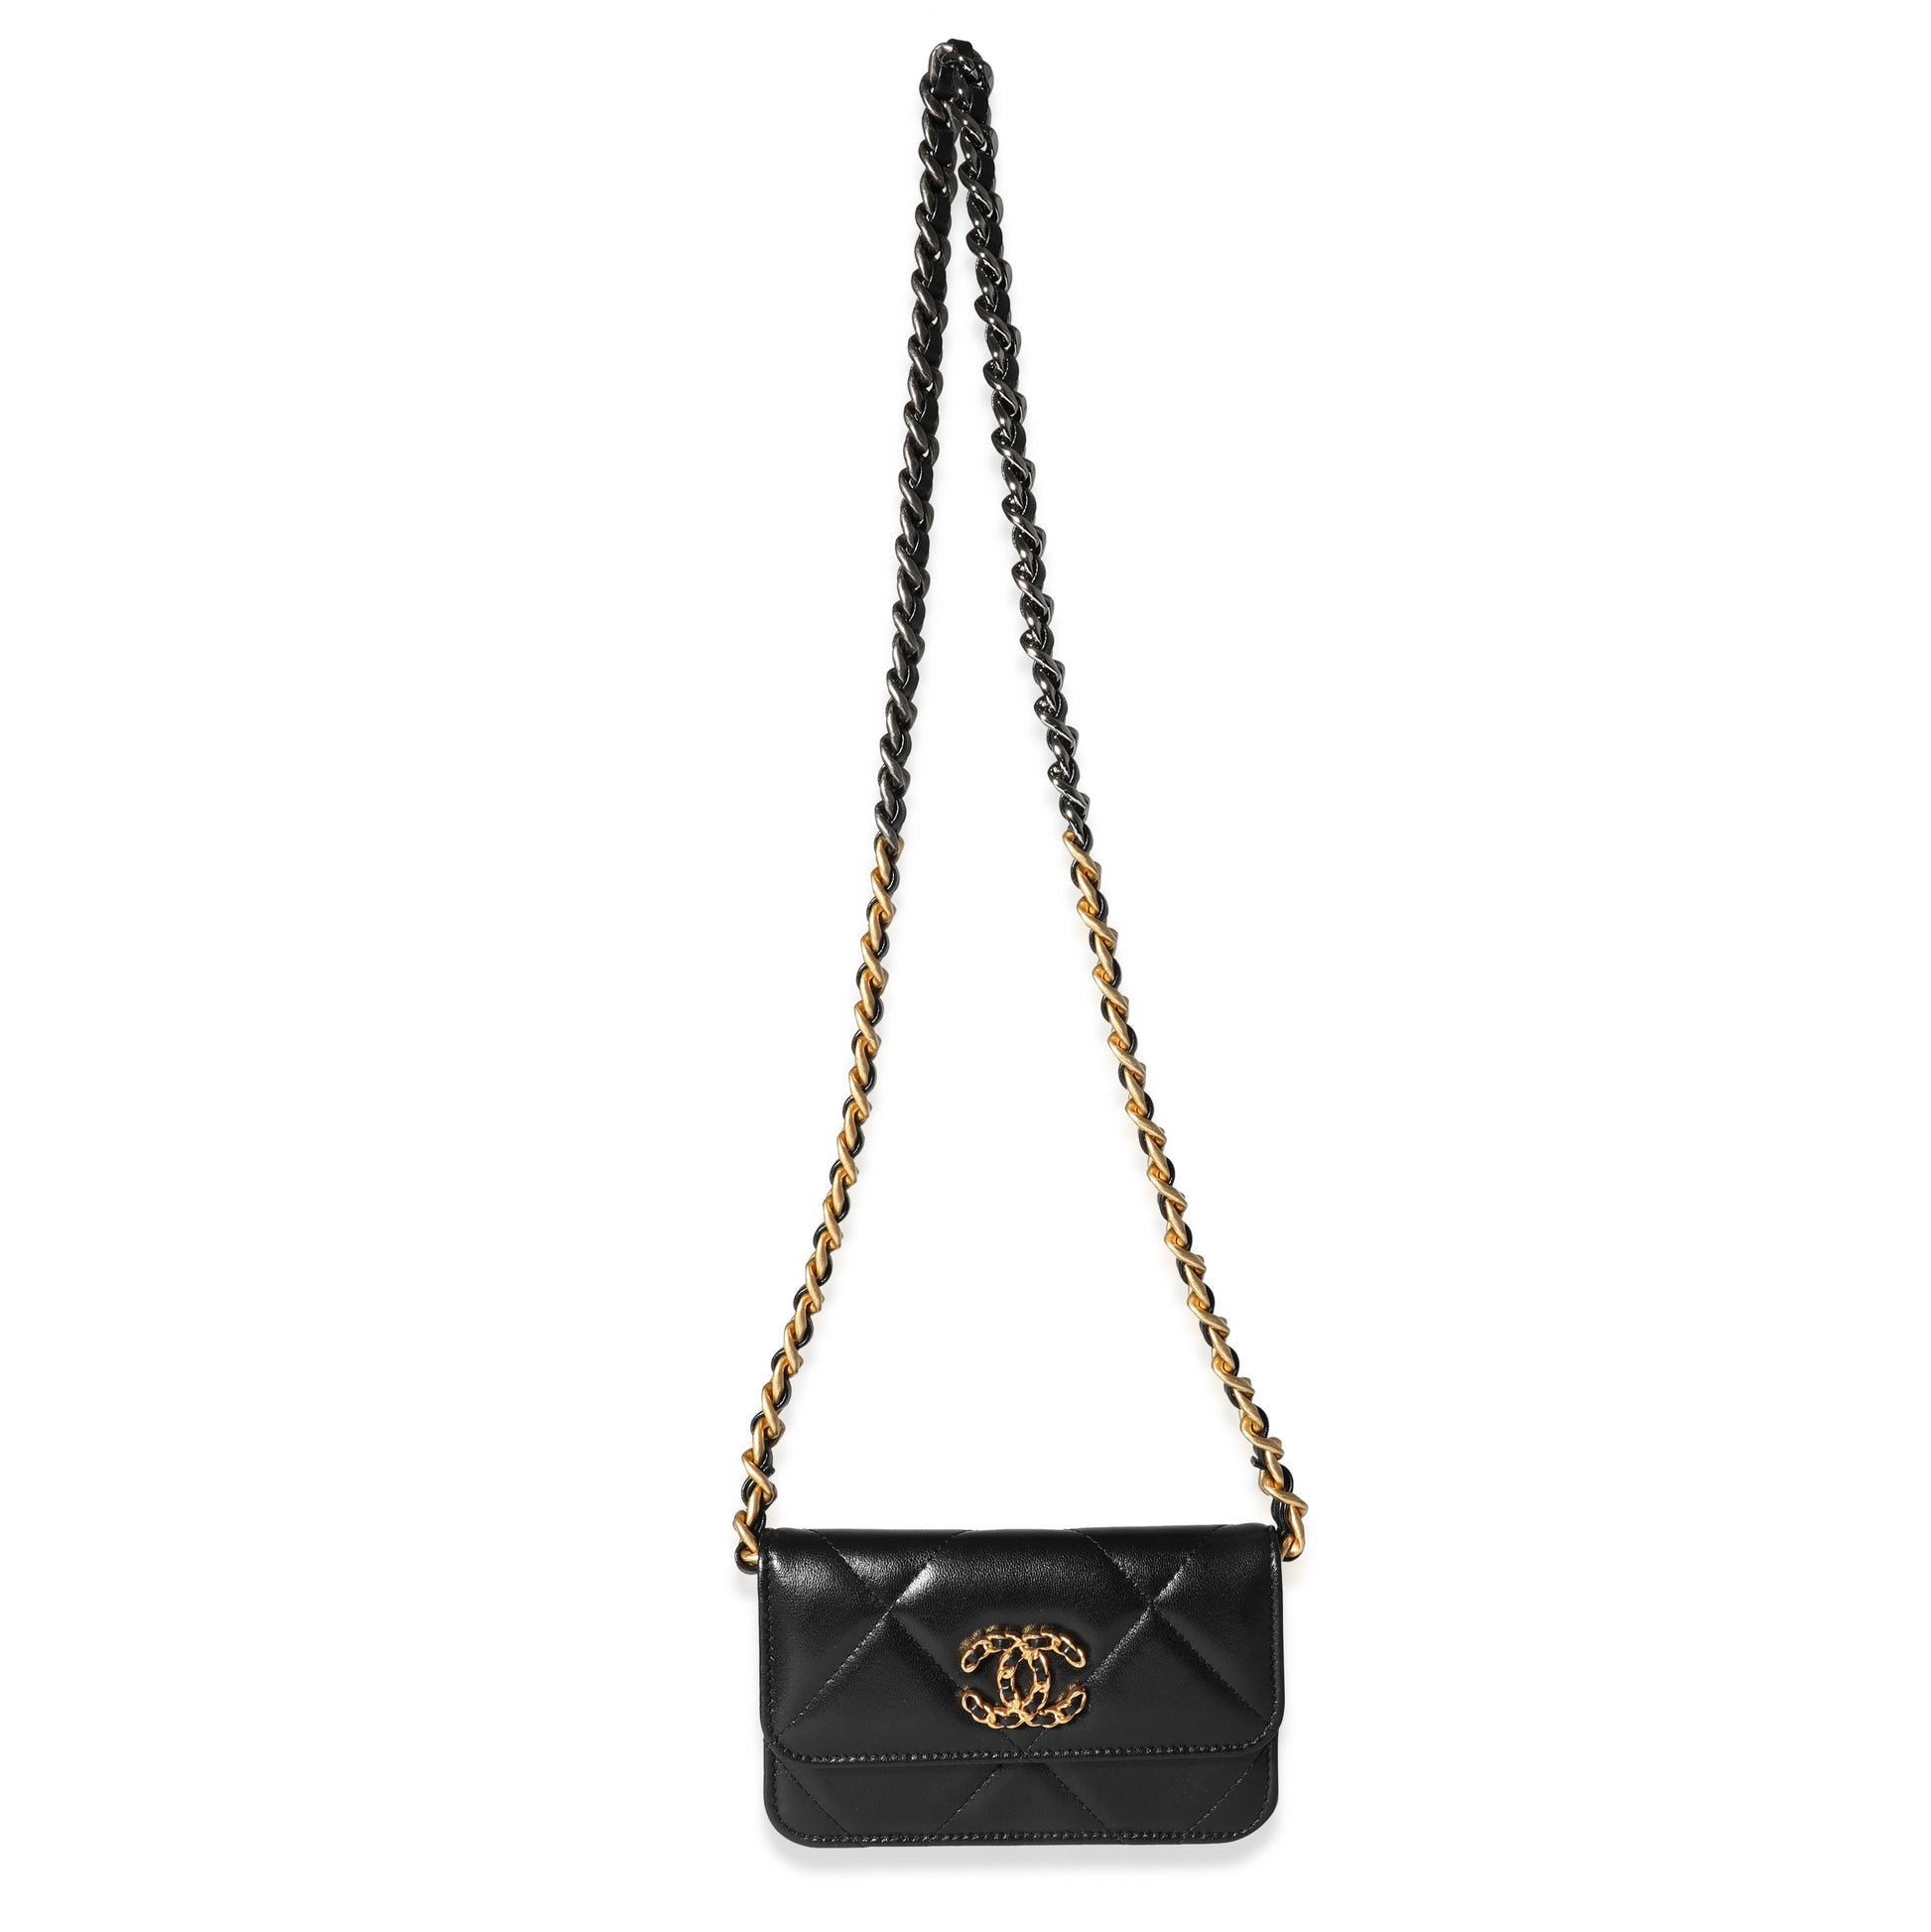 Chanel Black Quilted Lambskin Chanel 19 Mini Coin Purse With Chain, myGemma, QA